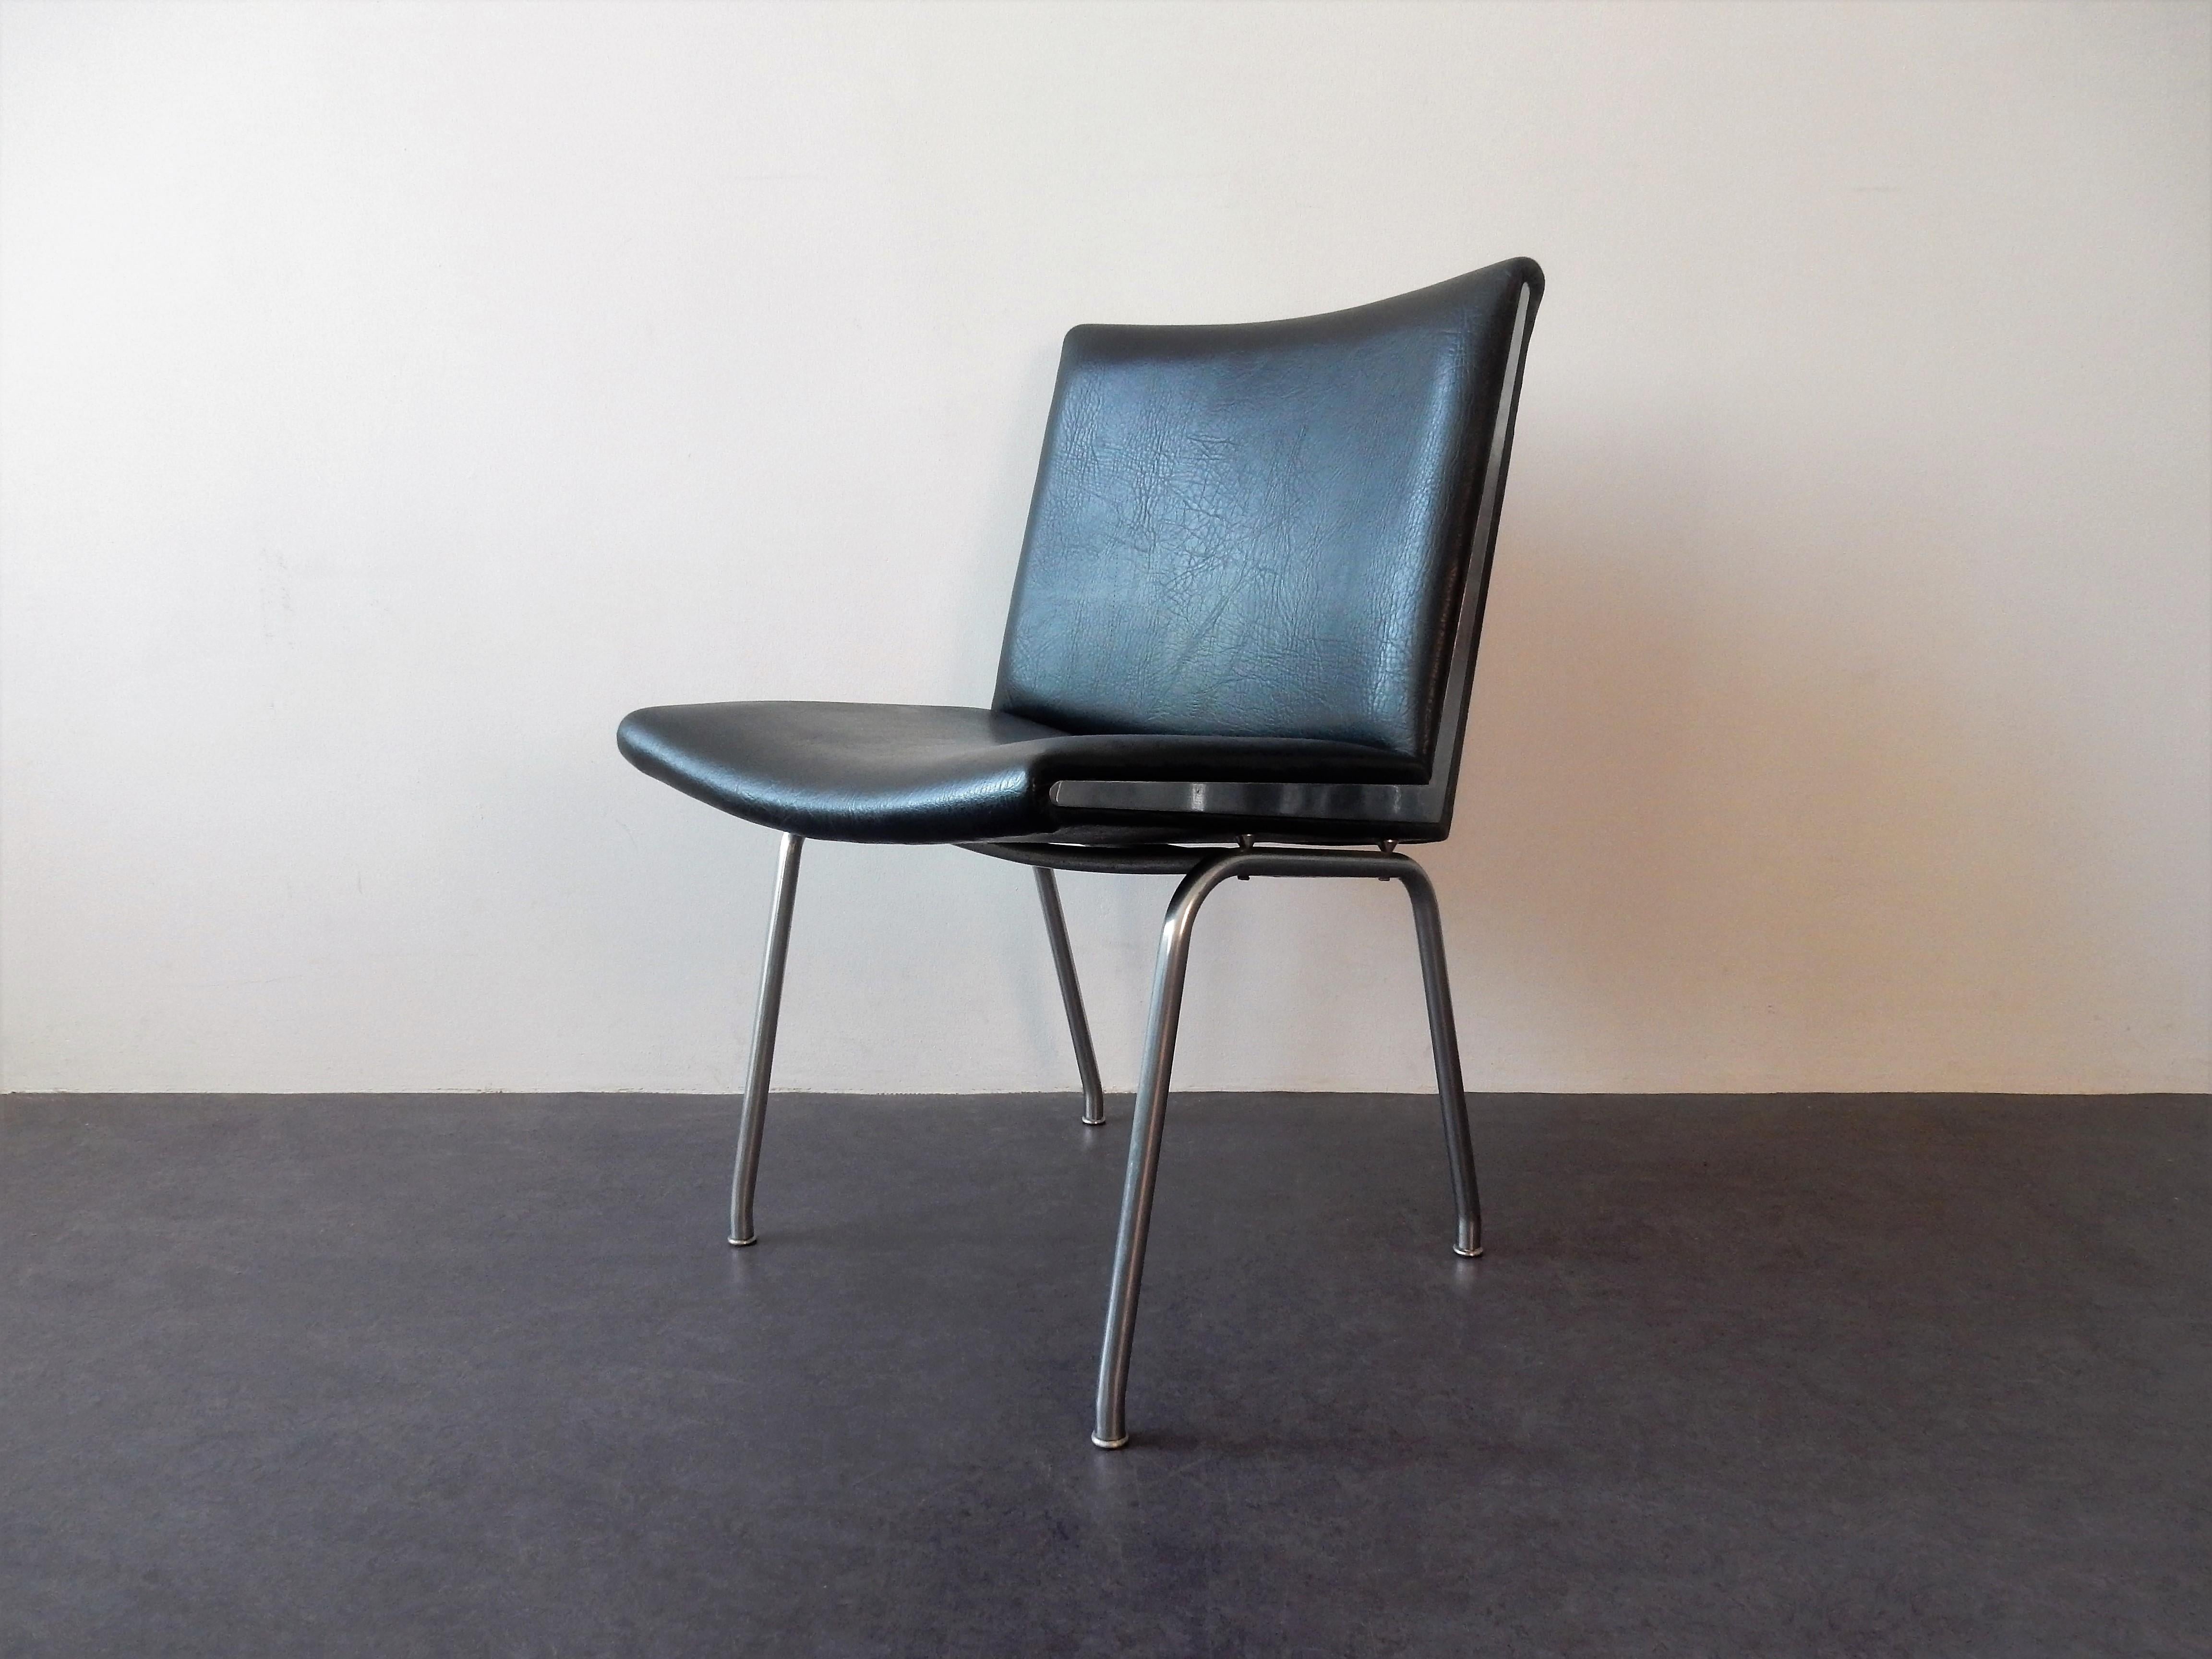 The Airport chair, model AP40, is a design from 1959 by Hans J. Wegner for the Kastrup Airport in Copenhagen. It was produced by the company AP Stolen. These chairs are made of chrome-plated steel with black artificial leather. They are in a very